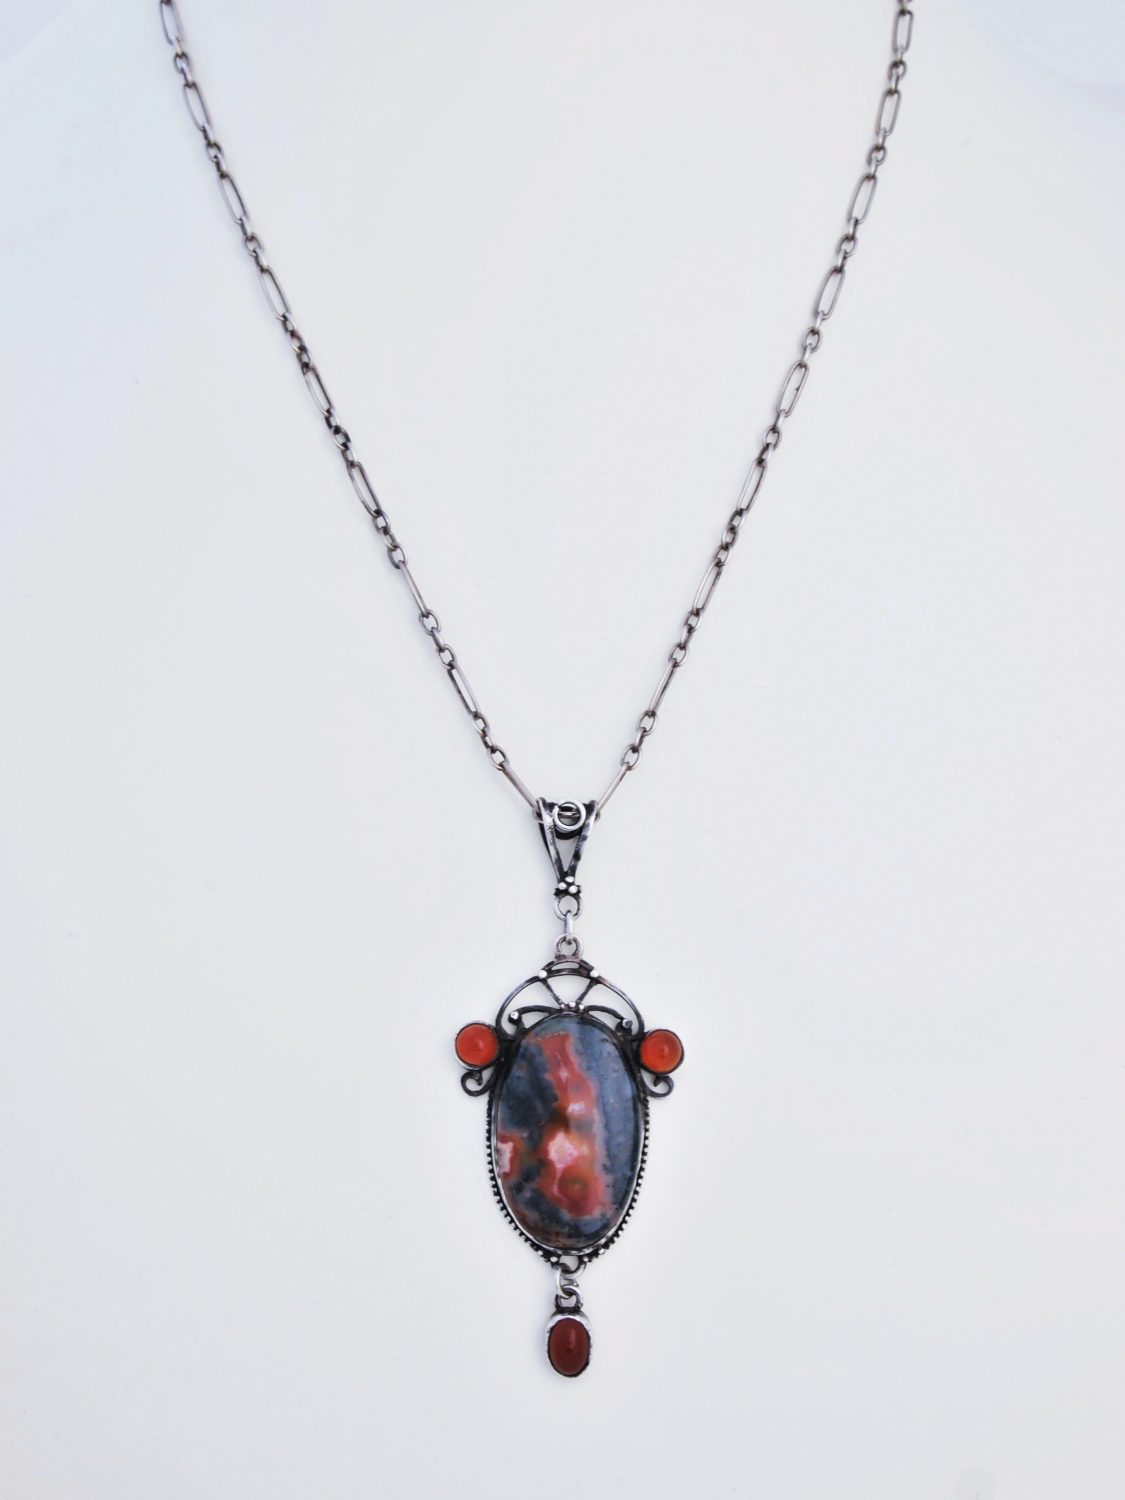 Silver and Agate Pendant by Edward Spencer - Nouveau Deco Arts